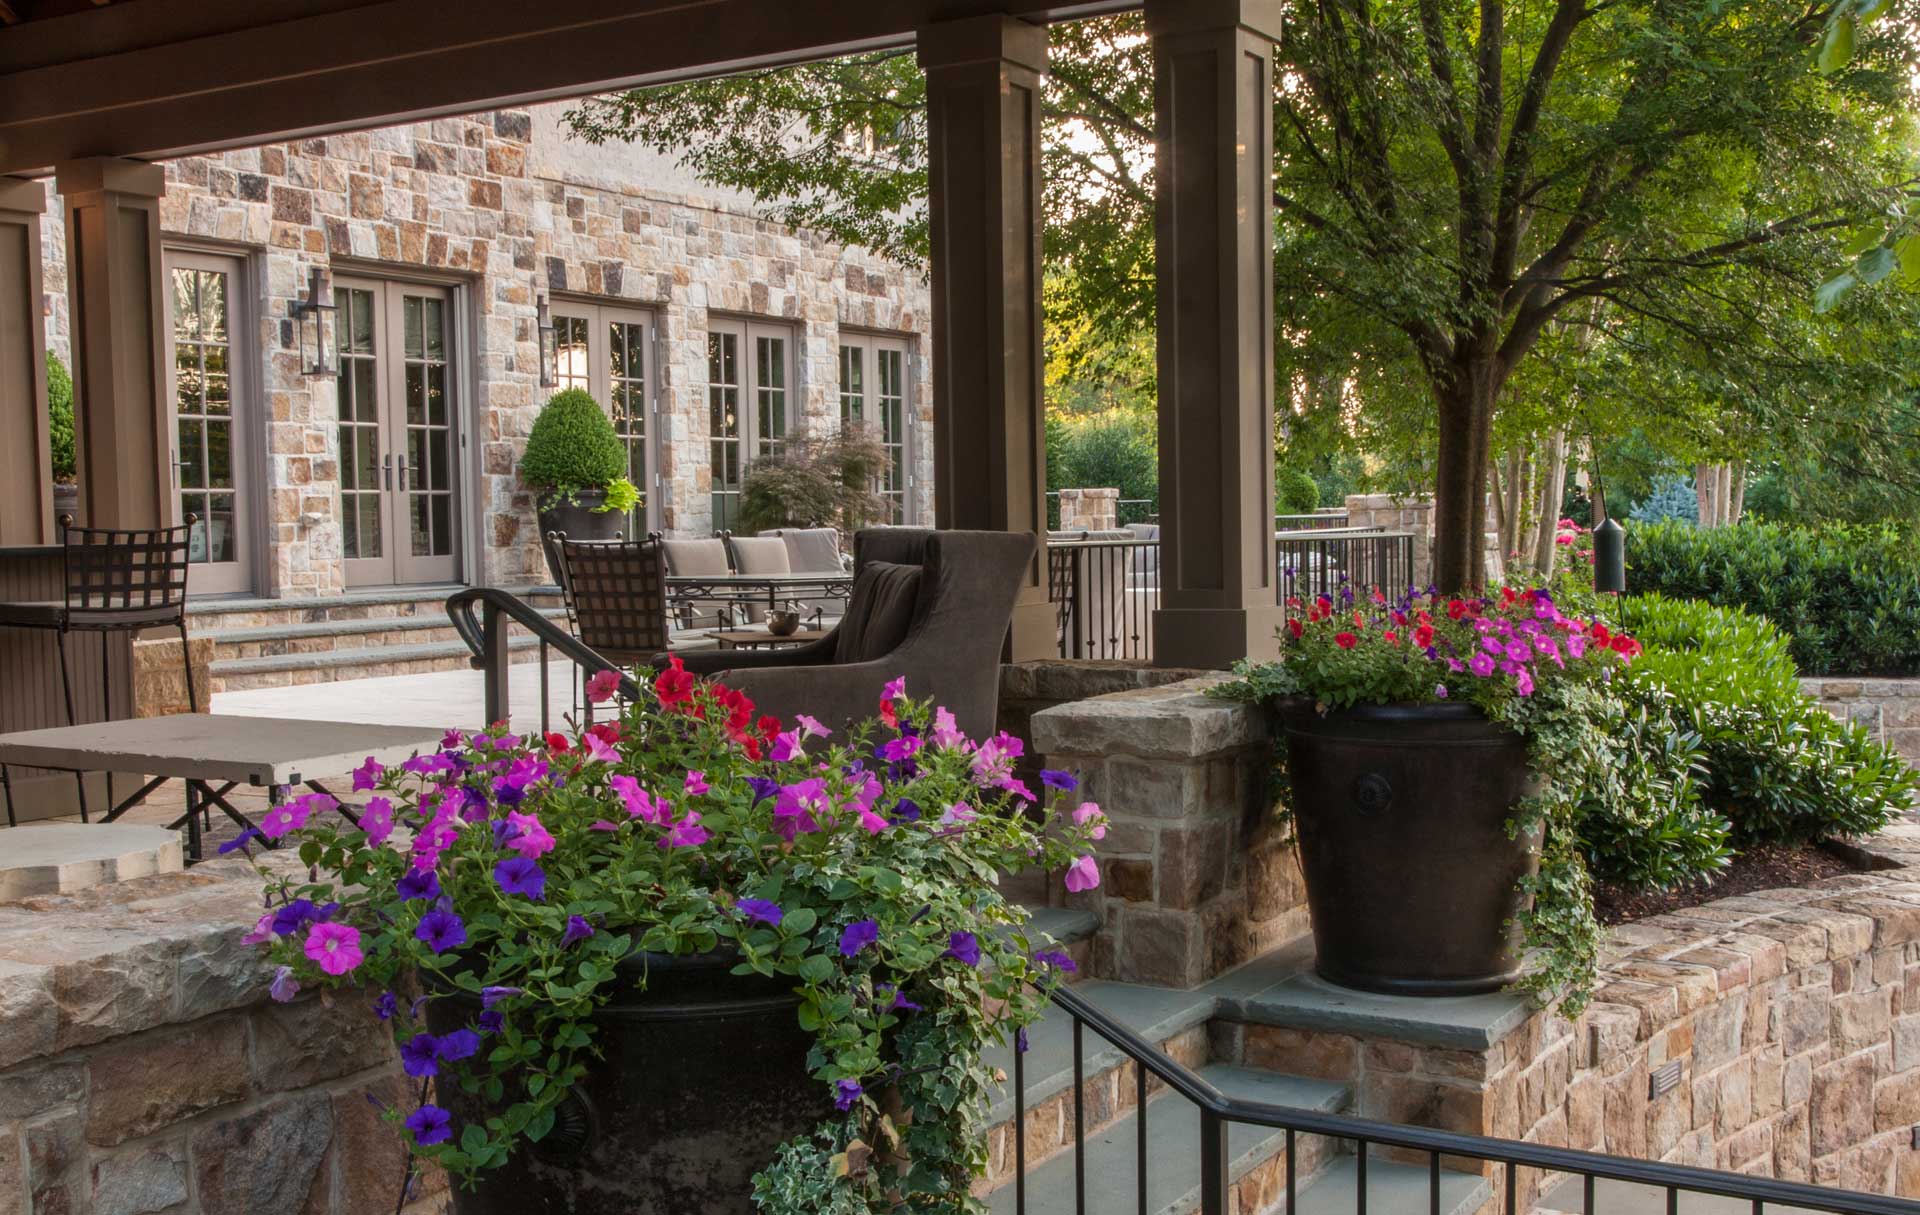 Colorful potted flowers adorn a stone wall on a charming patio.